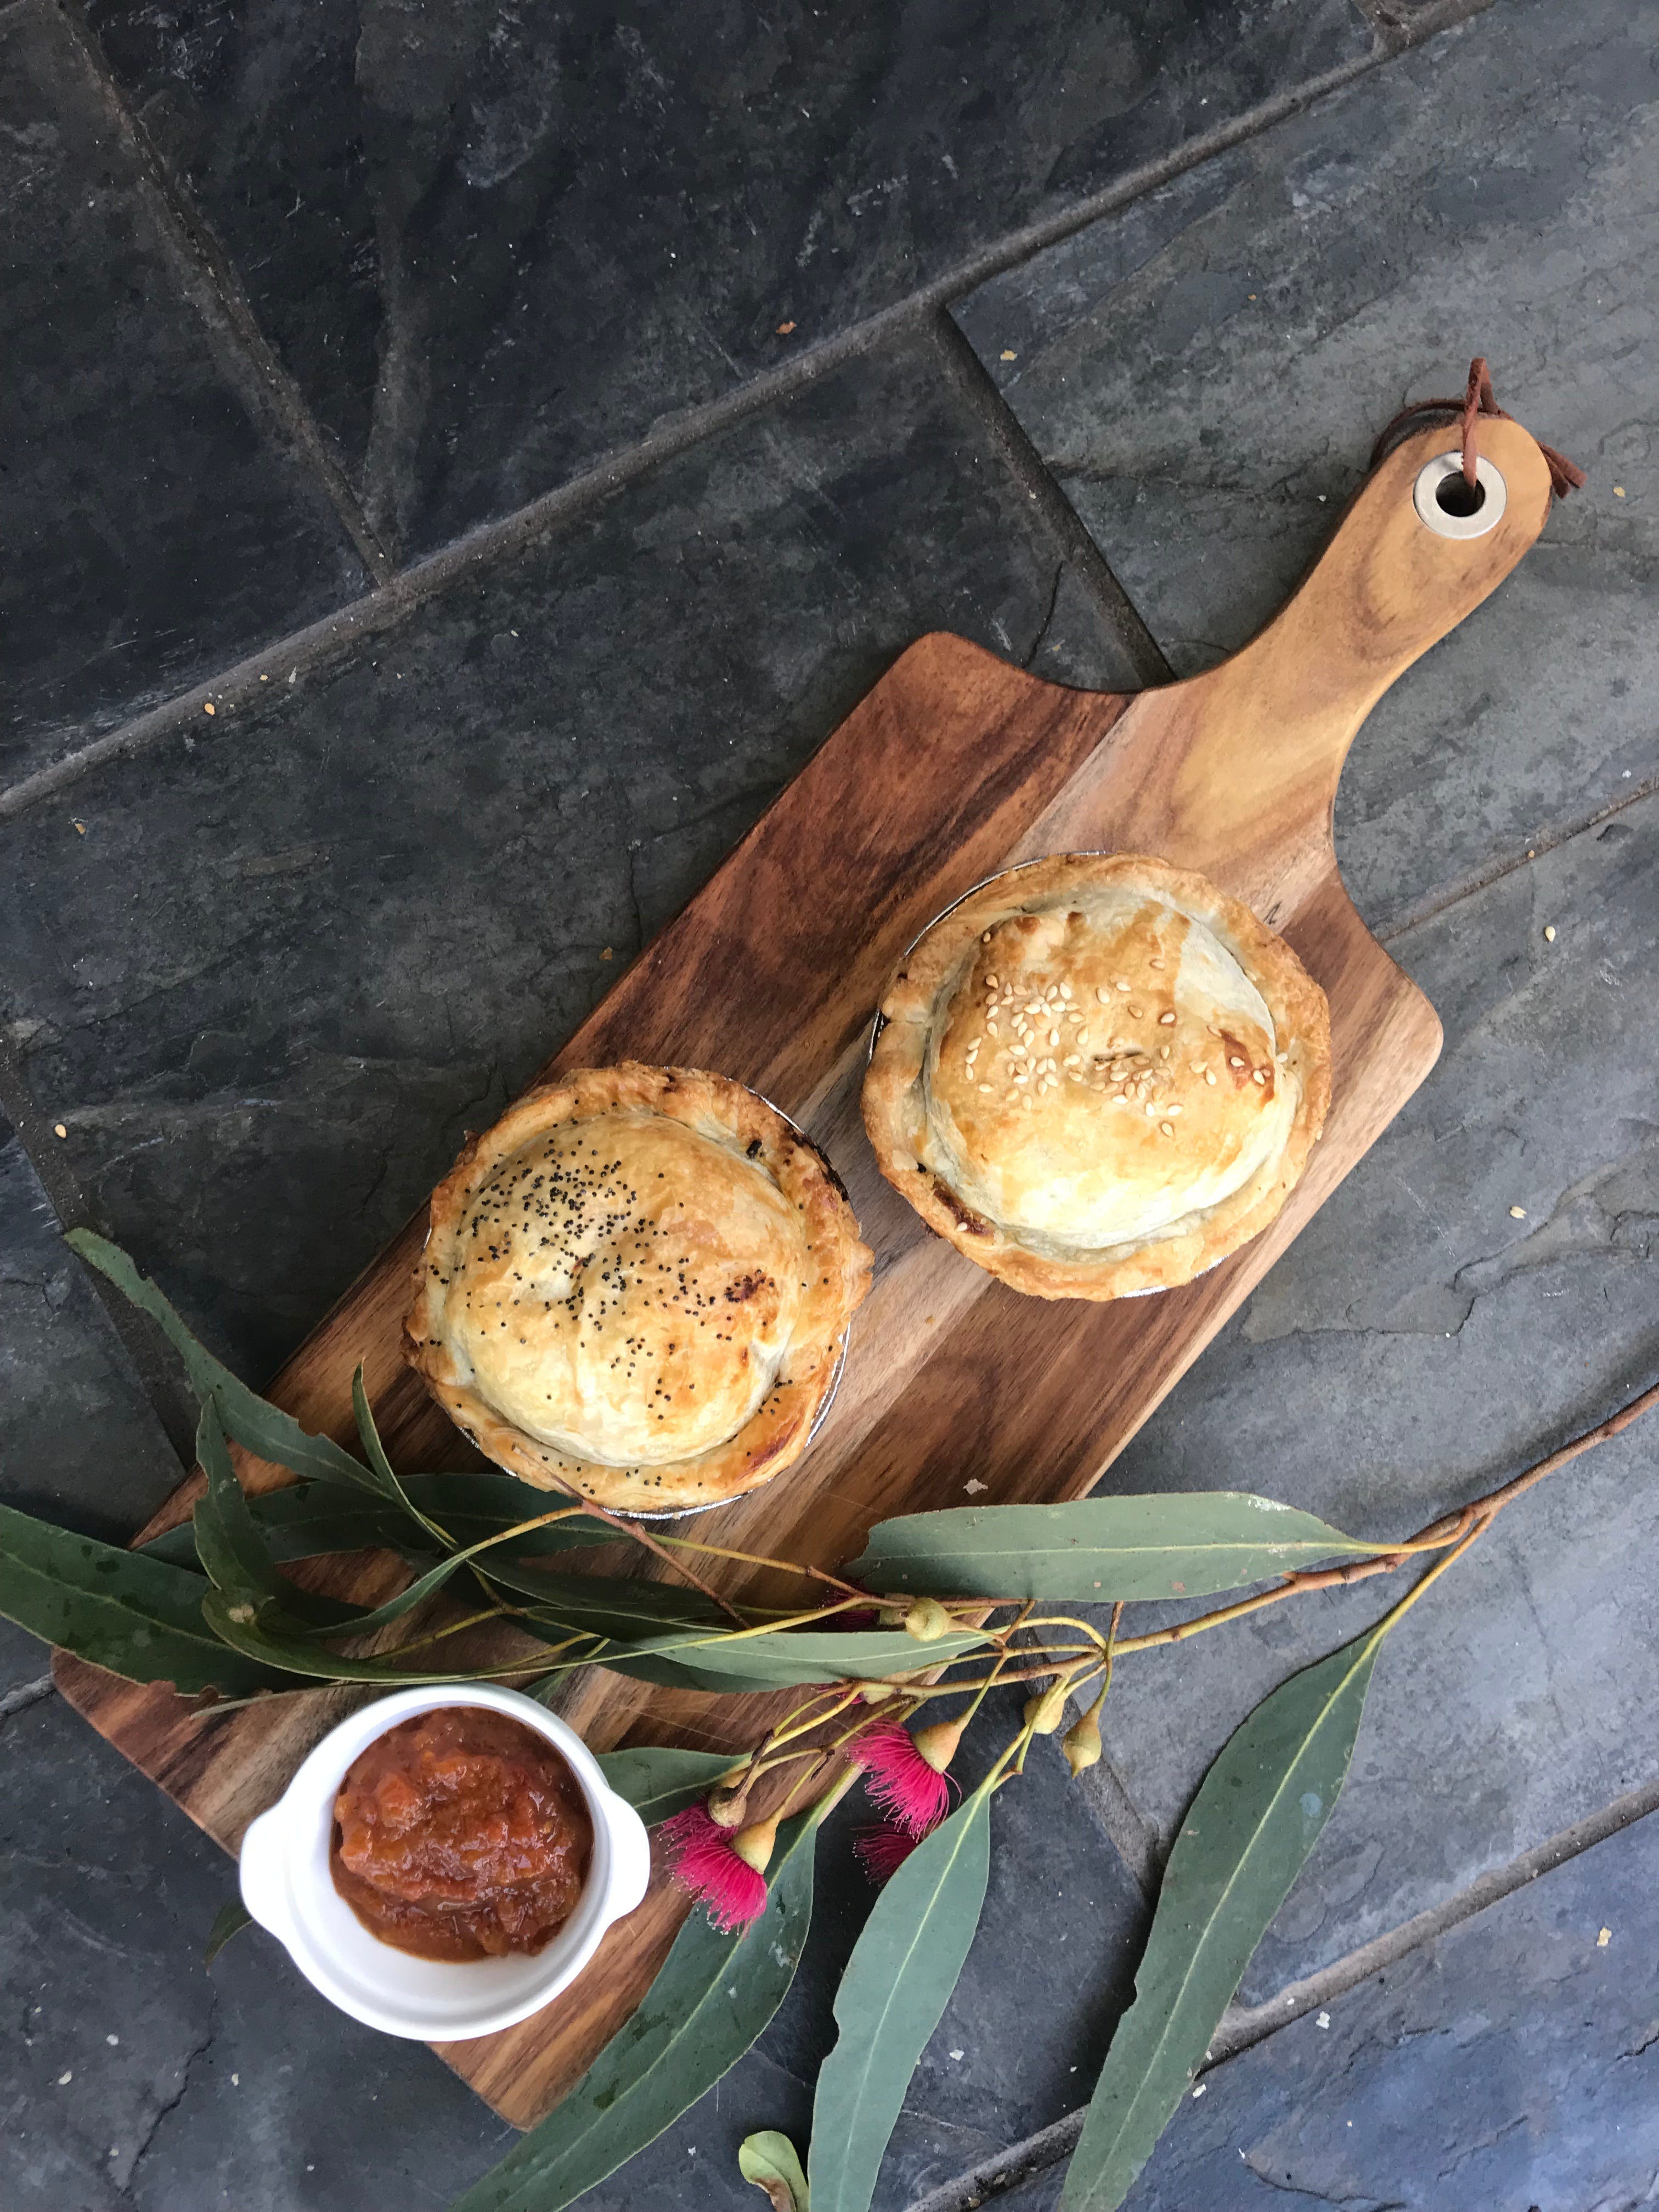 Aged Wine and Vintage Pies - Townsville Tourism